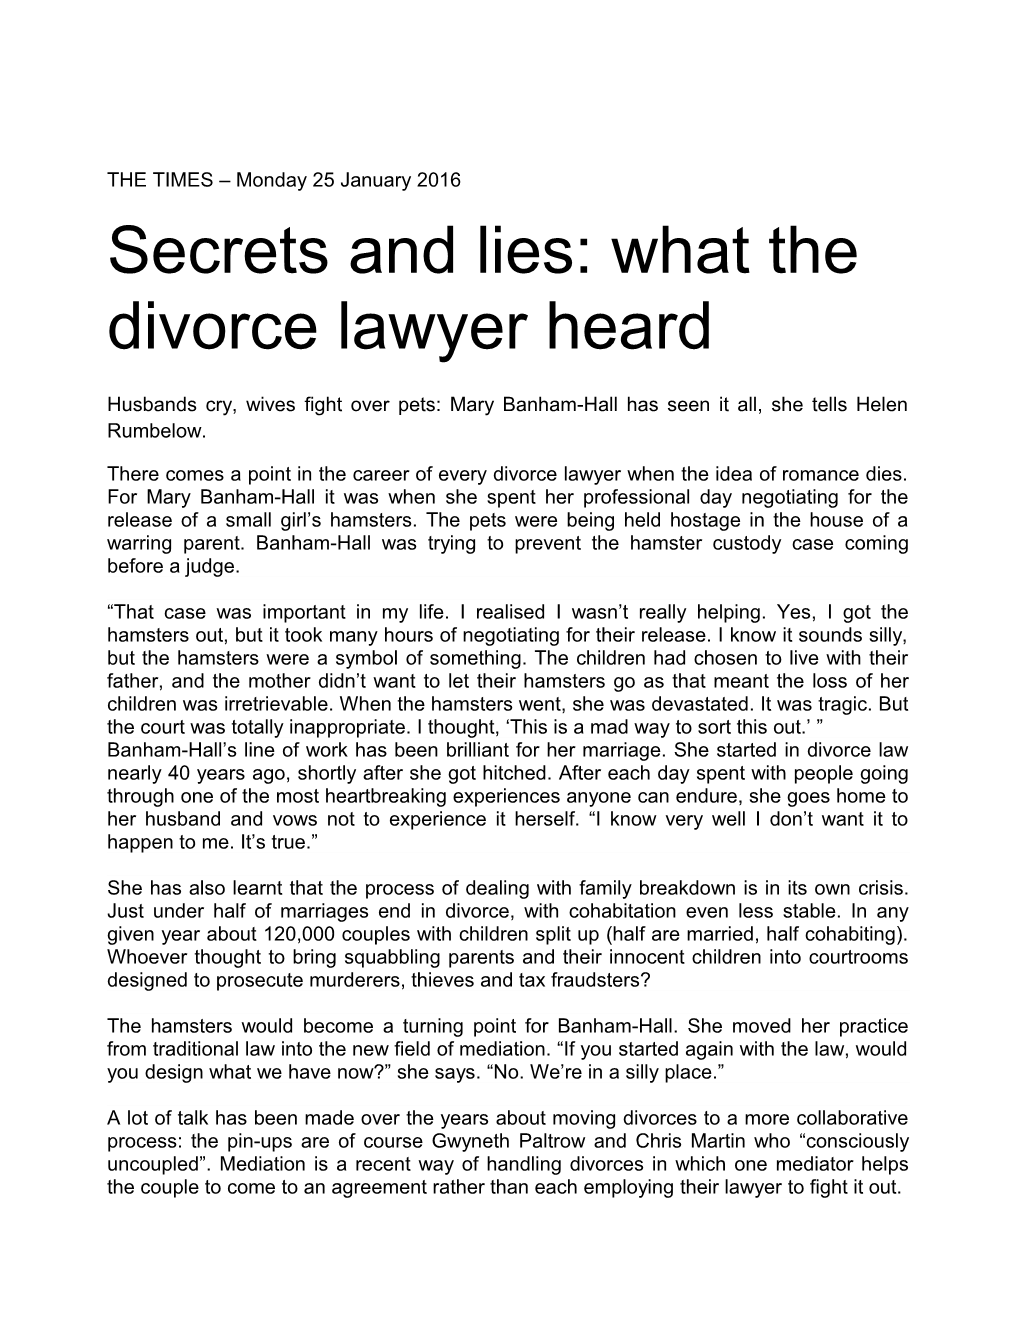 Secrets and Lies: What the Divorce Lawyer Heard